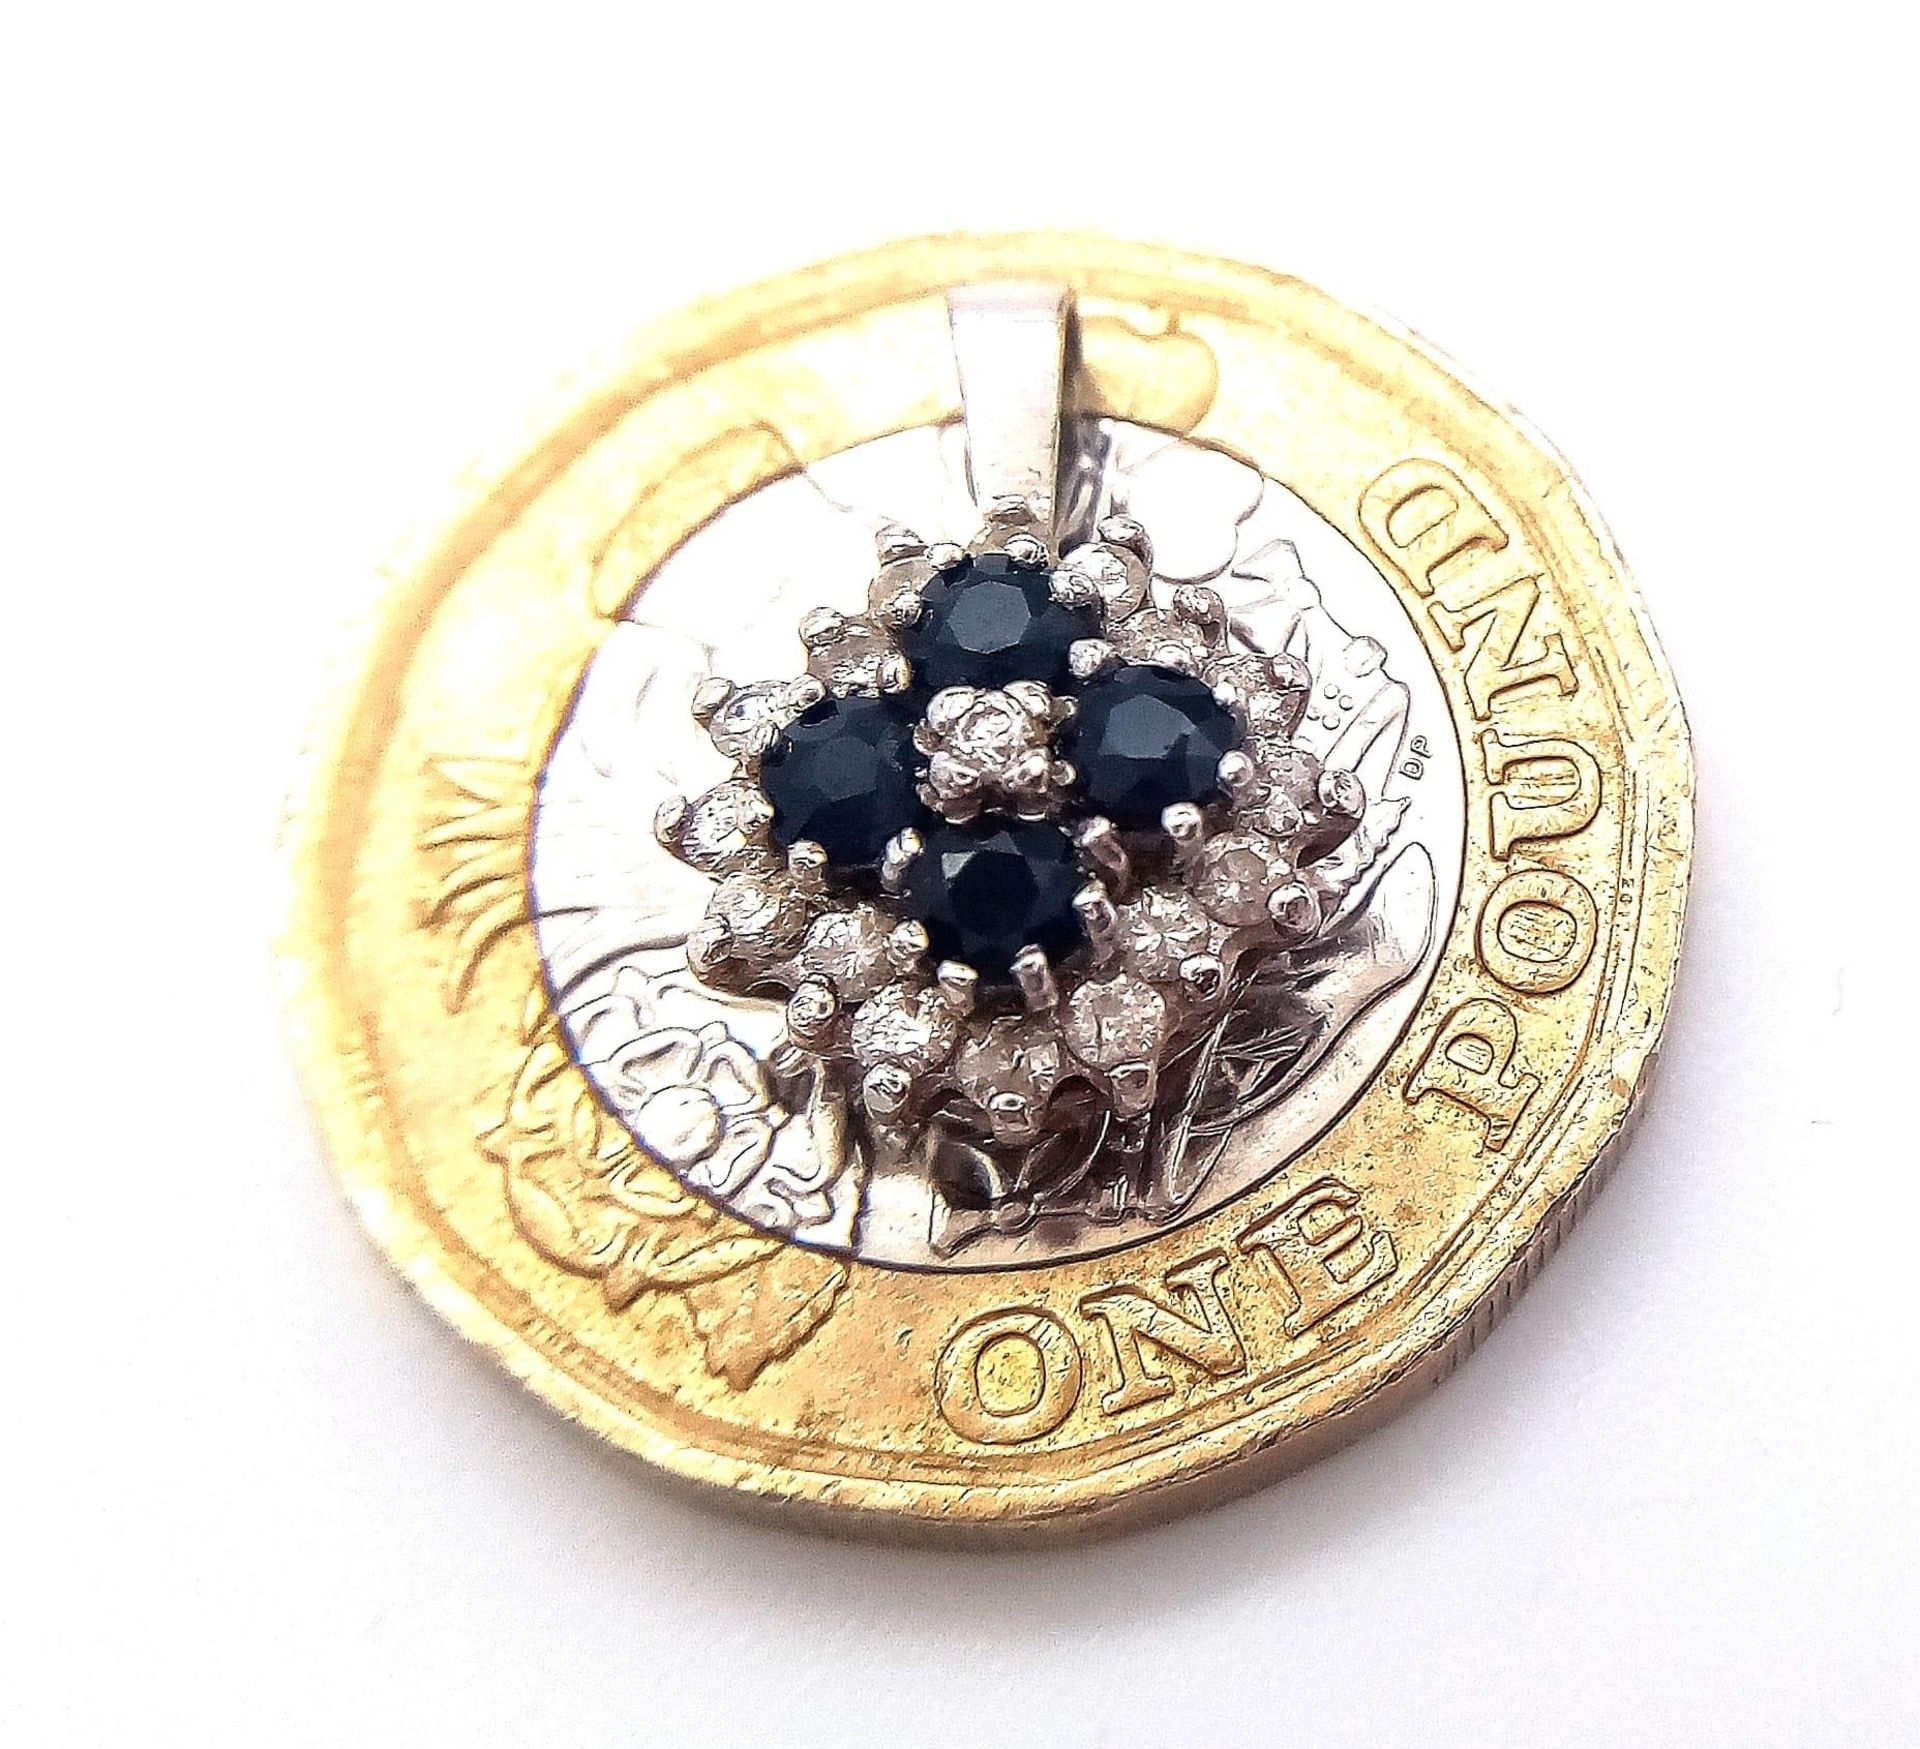 A 9K Gold Diamond and Sapphire Pendant with Matching Stud Earrings. 17mm pendant. 2.55g total - Image 6 of 11